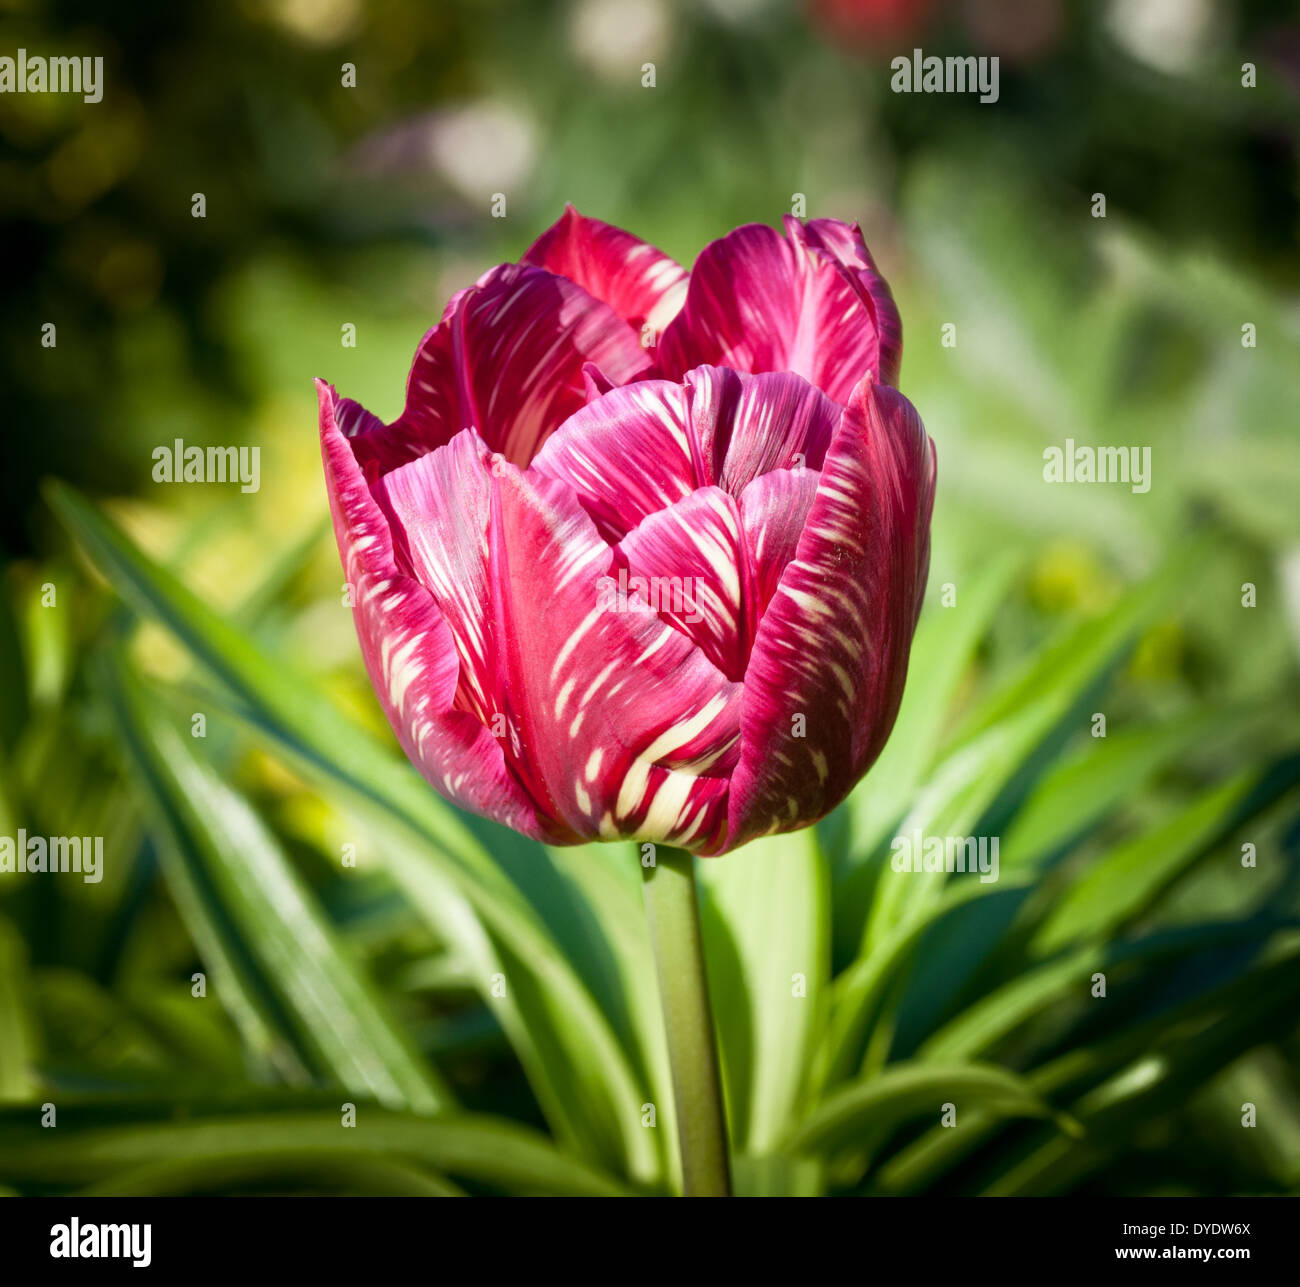 Purple and White Tulip in Full Bloom Stock Photo